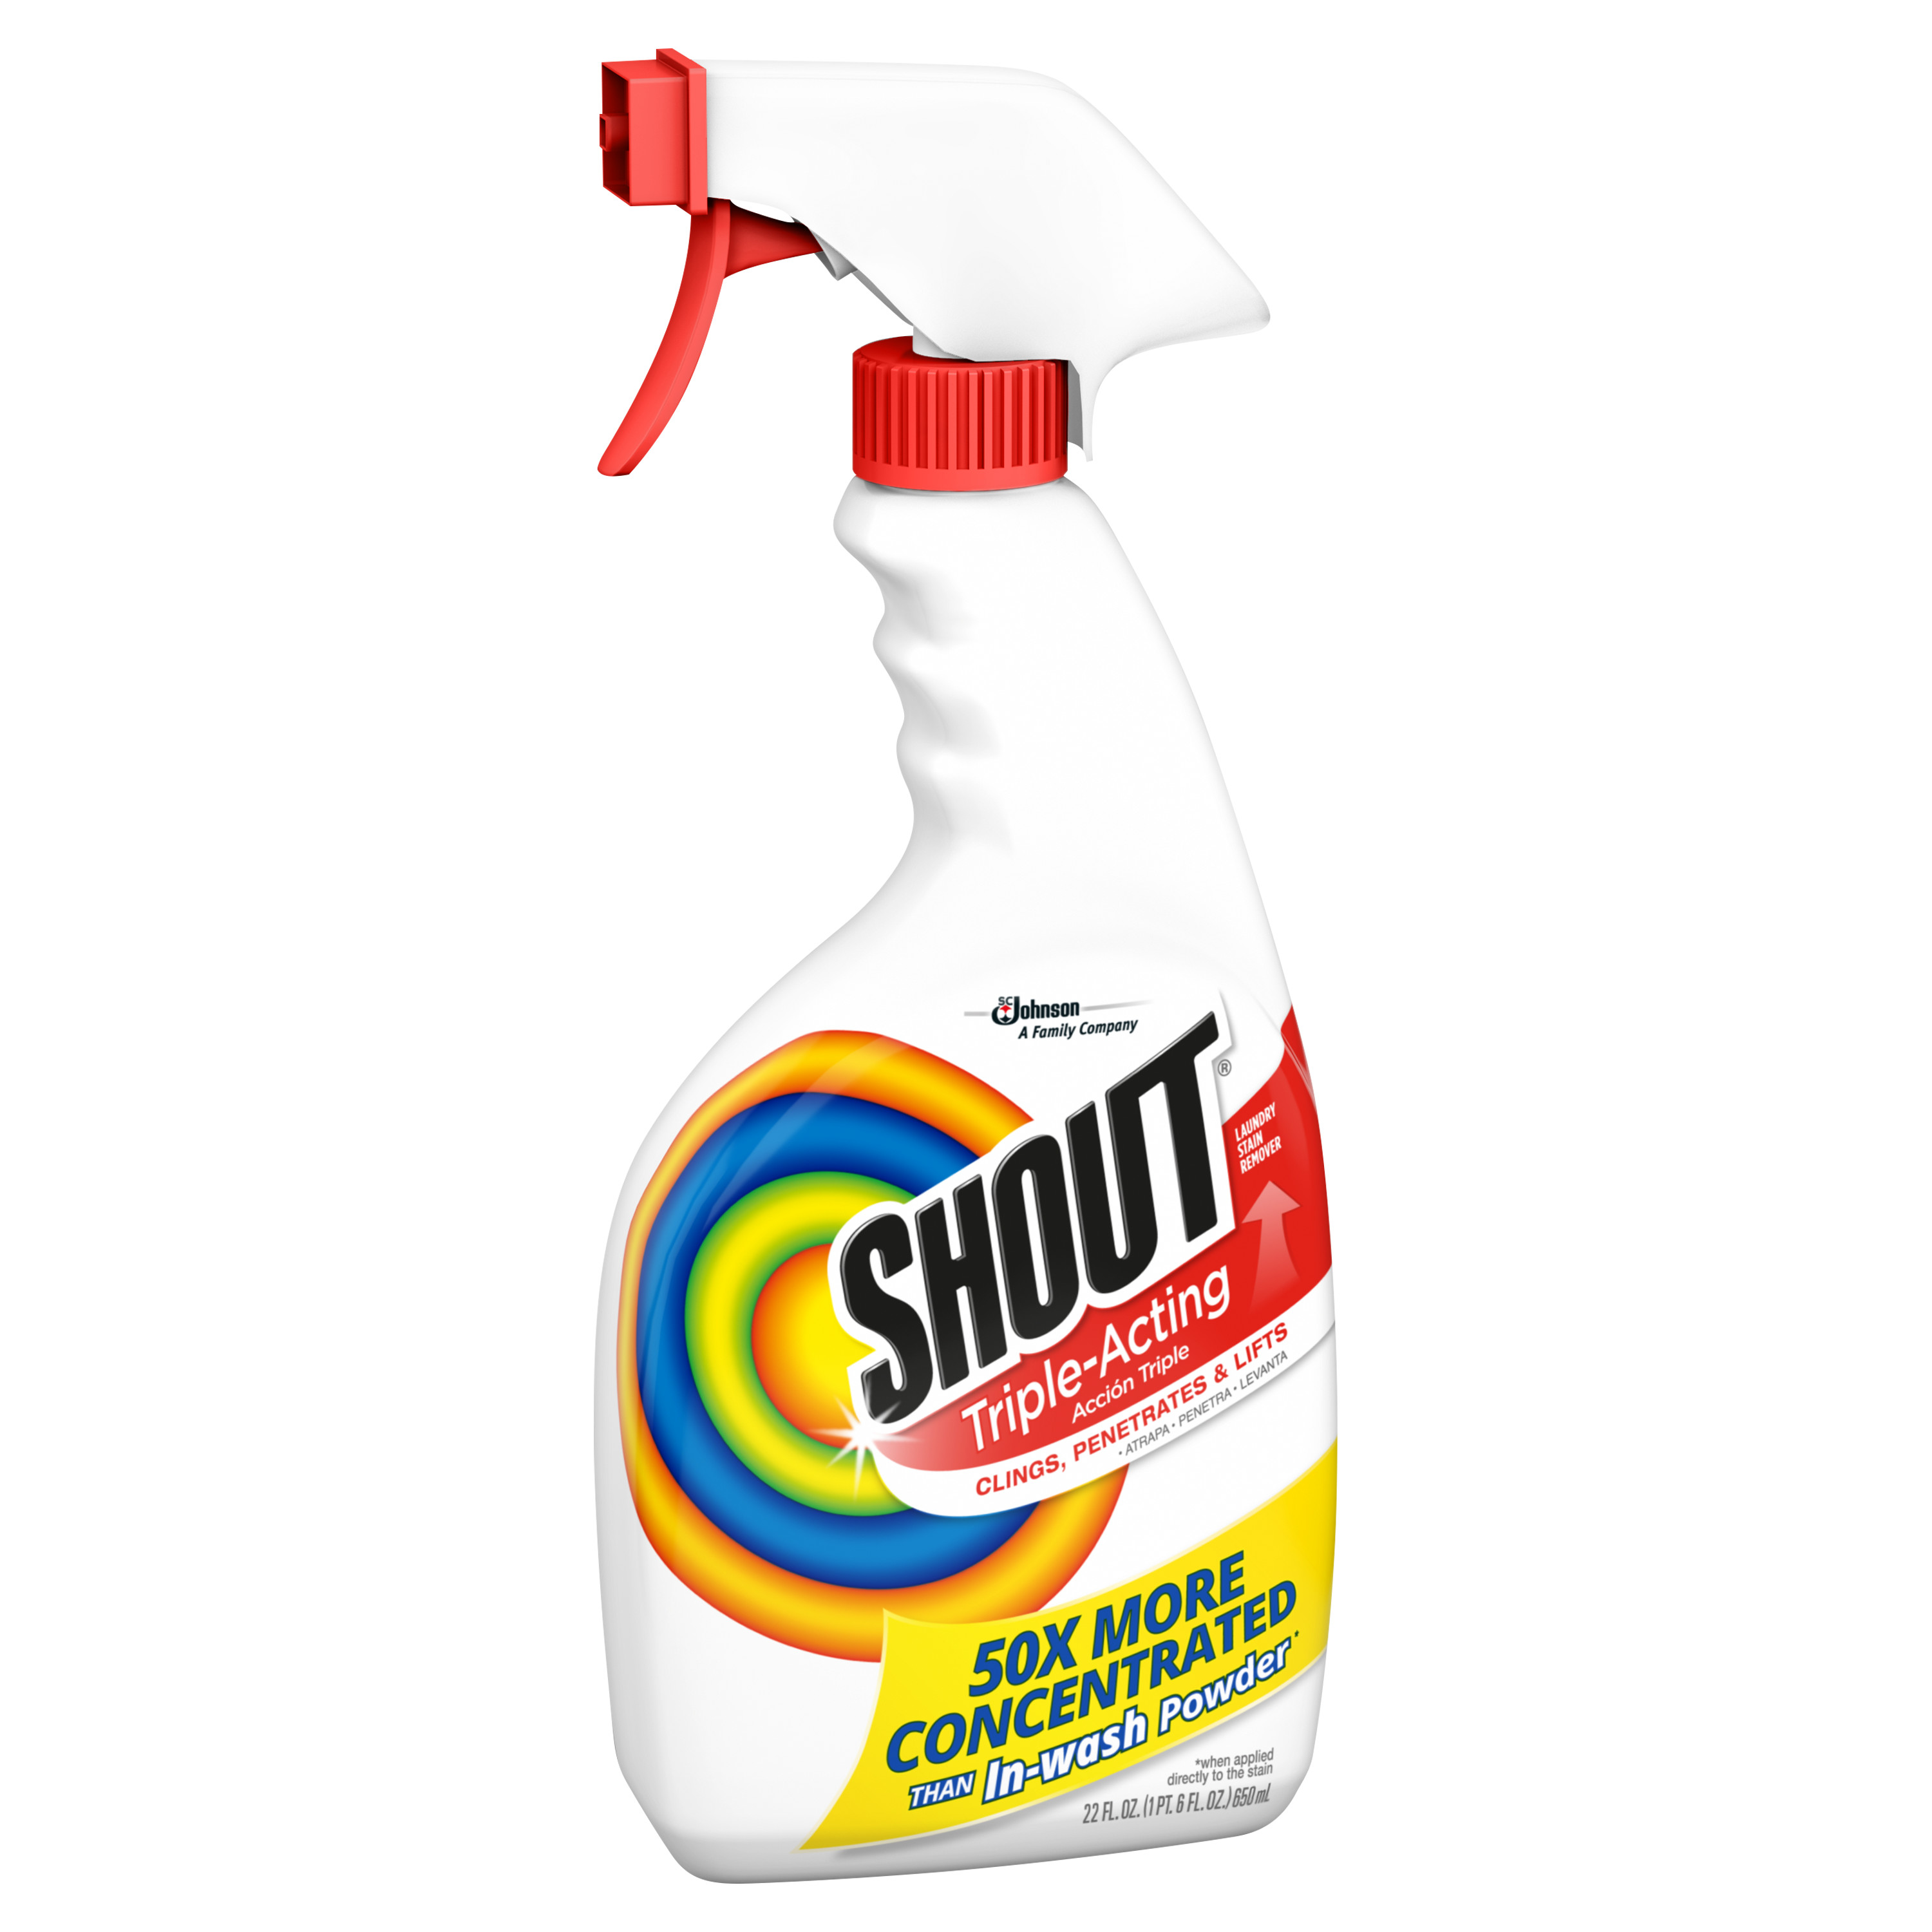 Shout Triple-Acting, Laundry Stain Remover, 22 Ounce - image 12 of 13